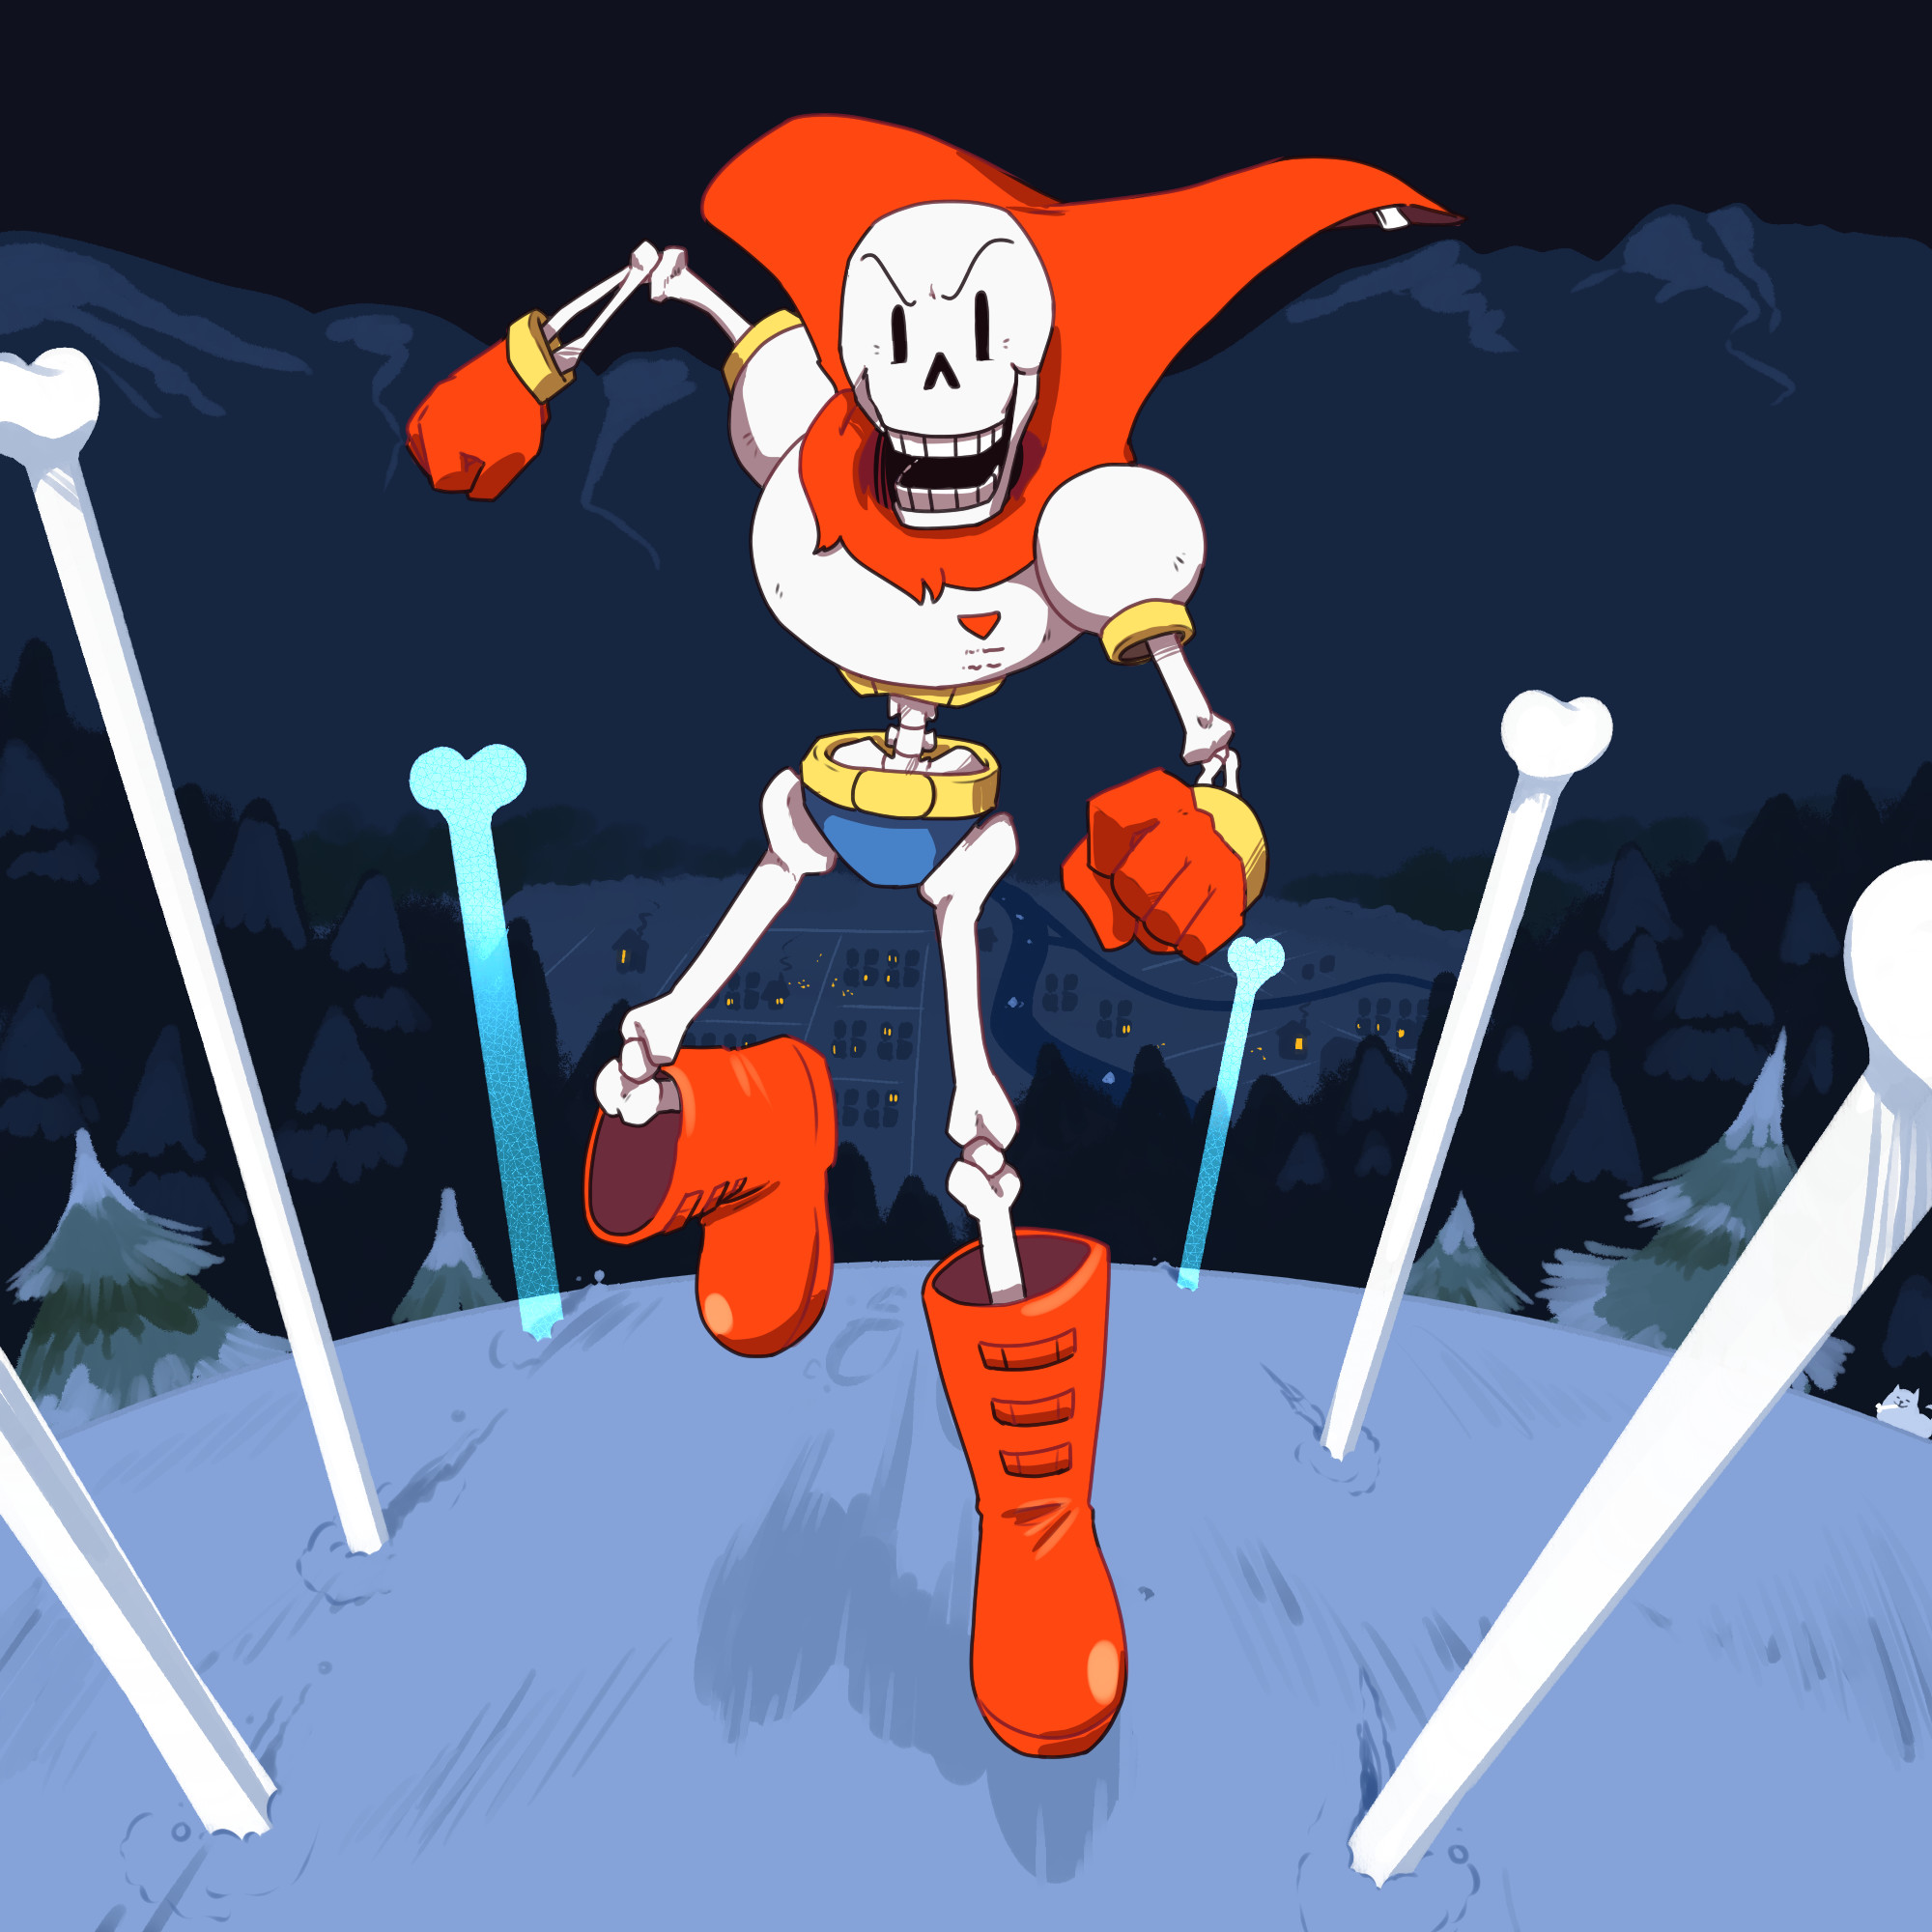 2000x2000 UNDERTALE-The Game images Papyrus HD wallpaper and background photos